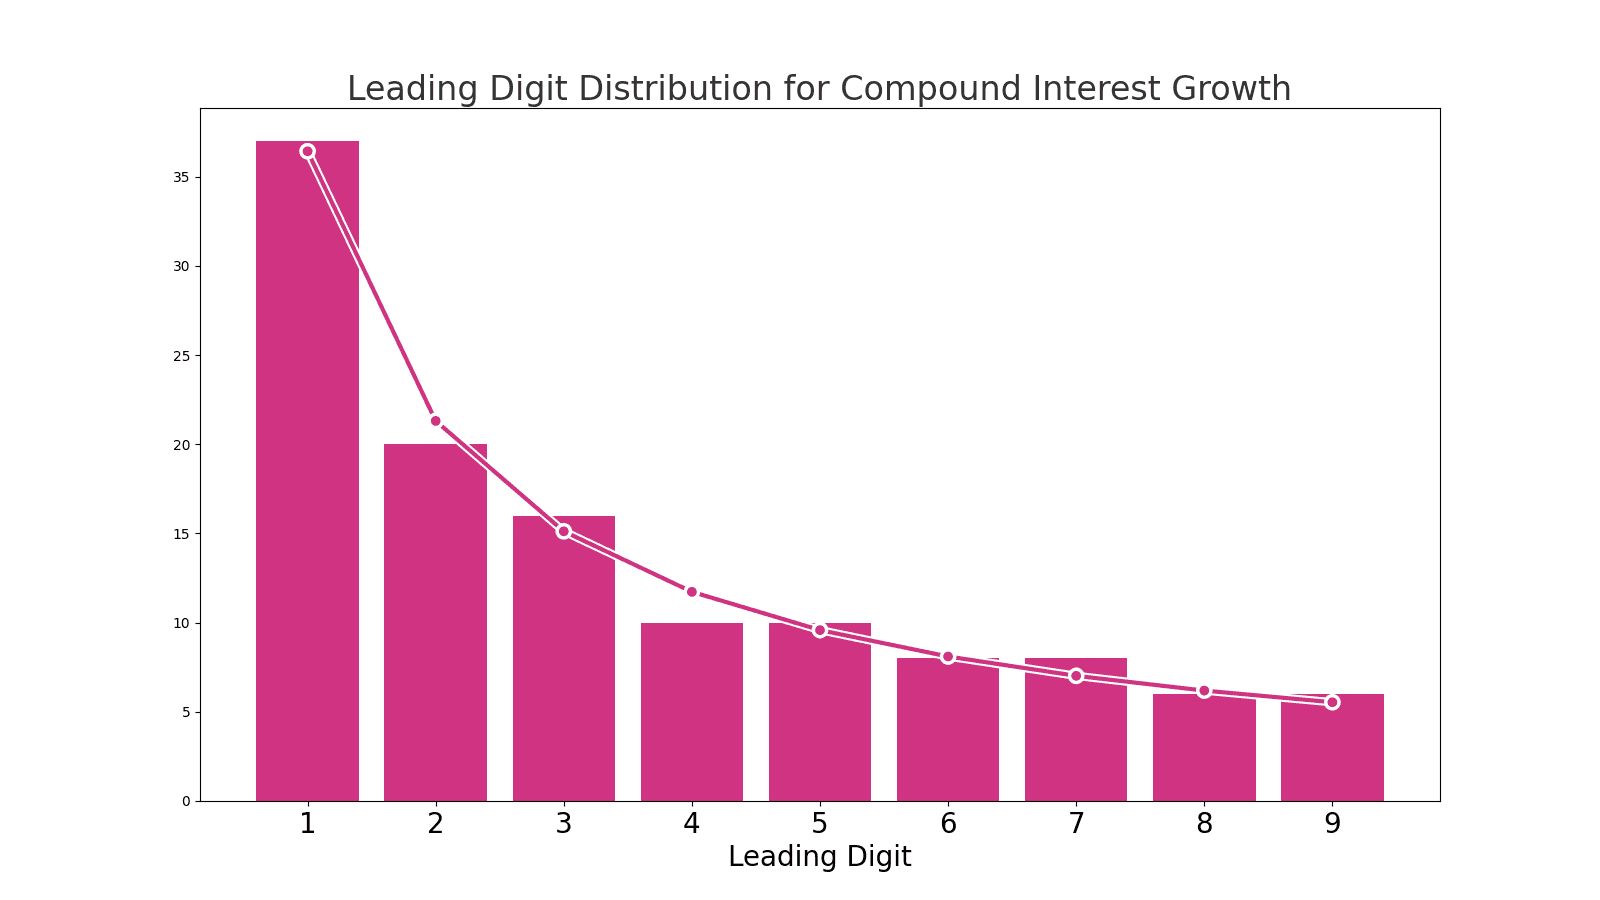 The lead-digit breakdown for a simulated compound interest growth rate.